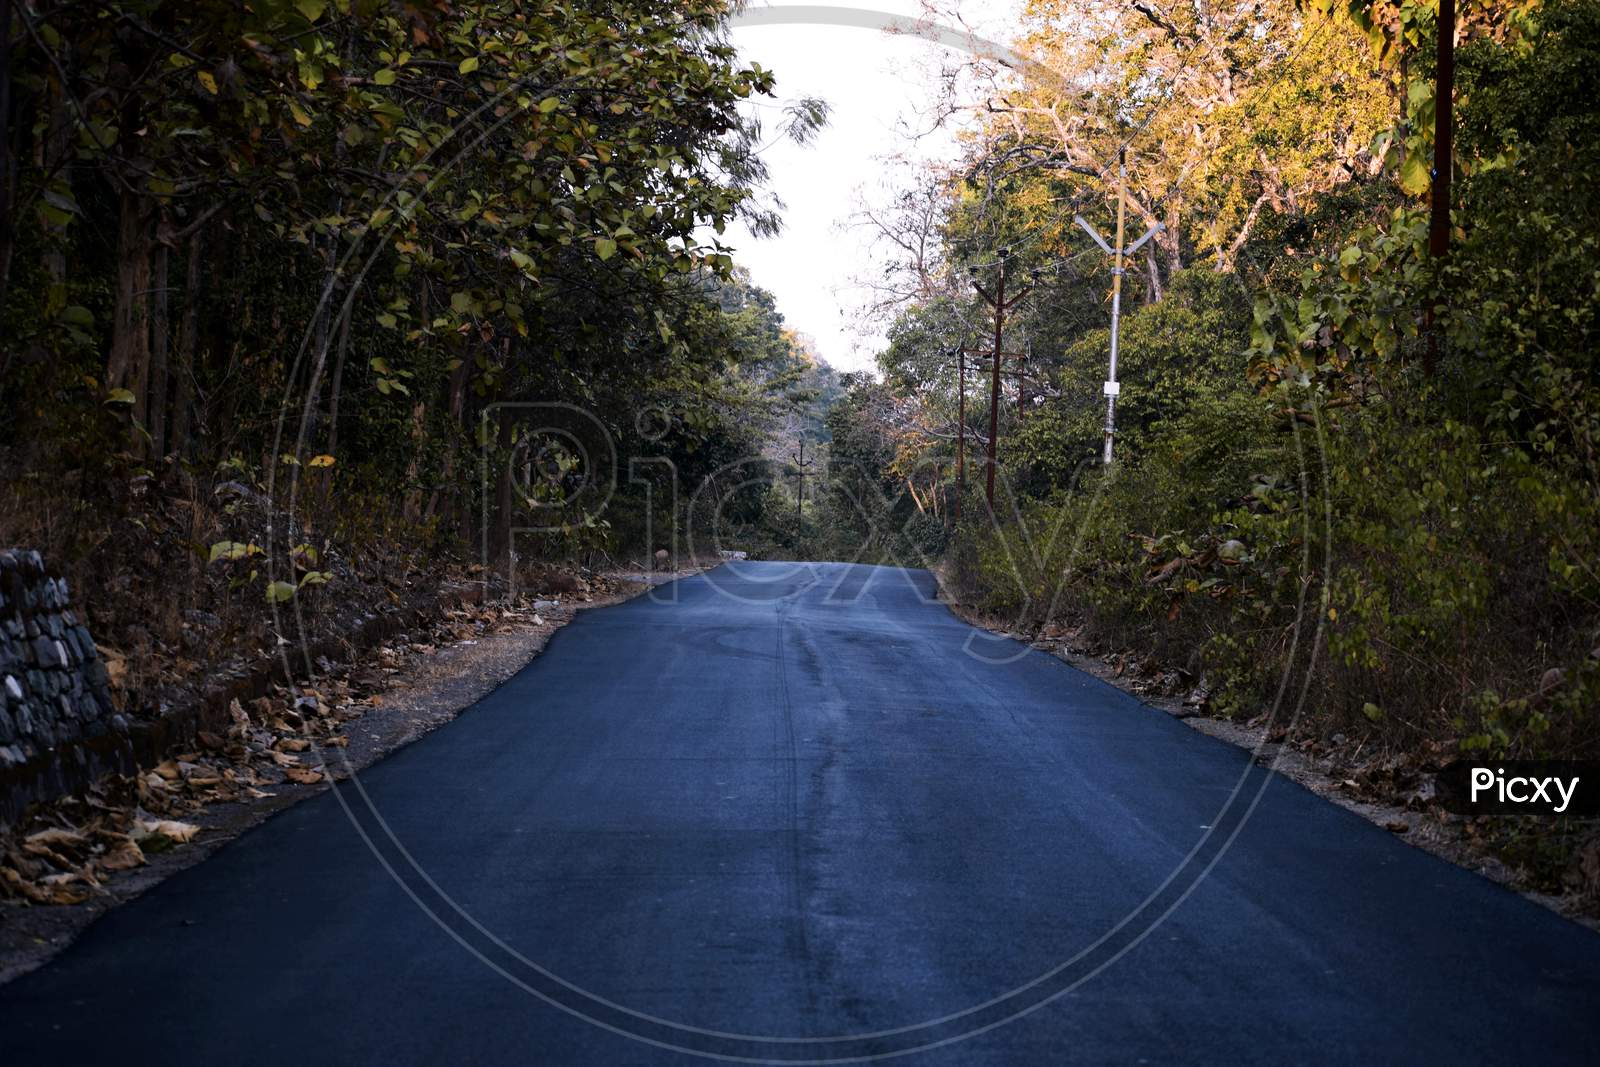 Centered Road Leading Symmetrical Through A Valley In The Thai Jungle In The Region Of Uttarakhand, India